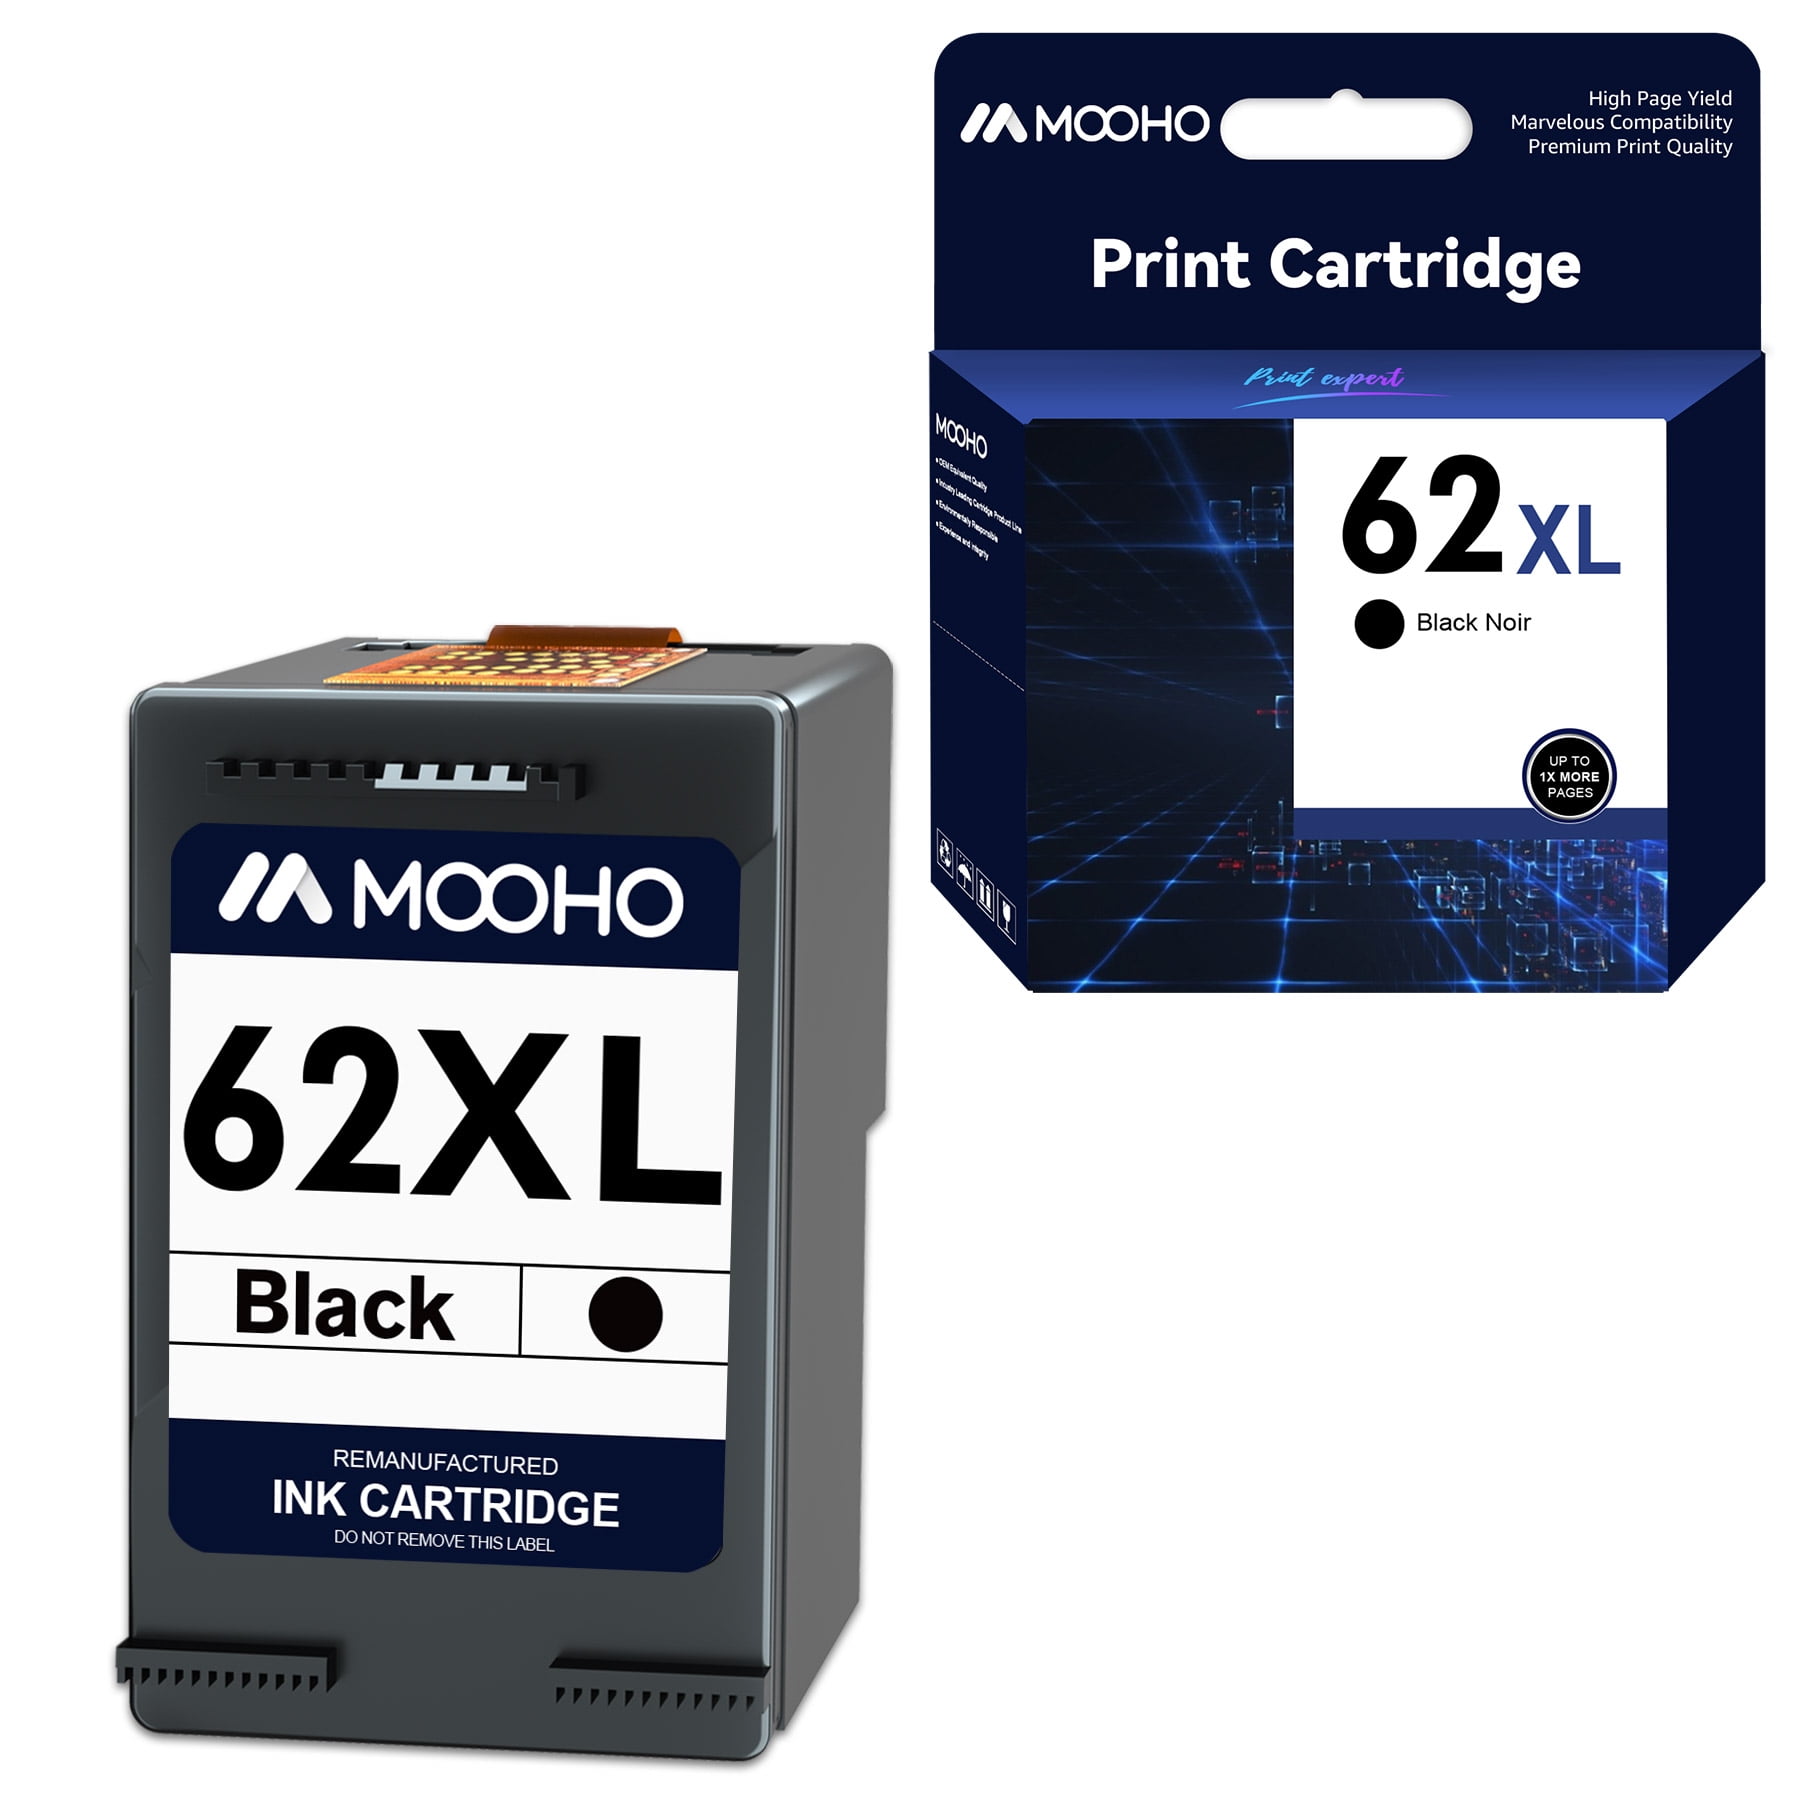 Mooho 62XL Ink Cartridge Replacement for HP Ink 62 Black Works with HP Envy 5540 5640 5660 7645 7640 OfficeJet 5740 8040 OfficeJet Mobile 250 200 Series Printer,1 Pack - Walmart.com